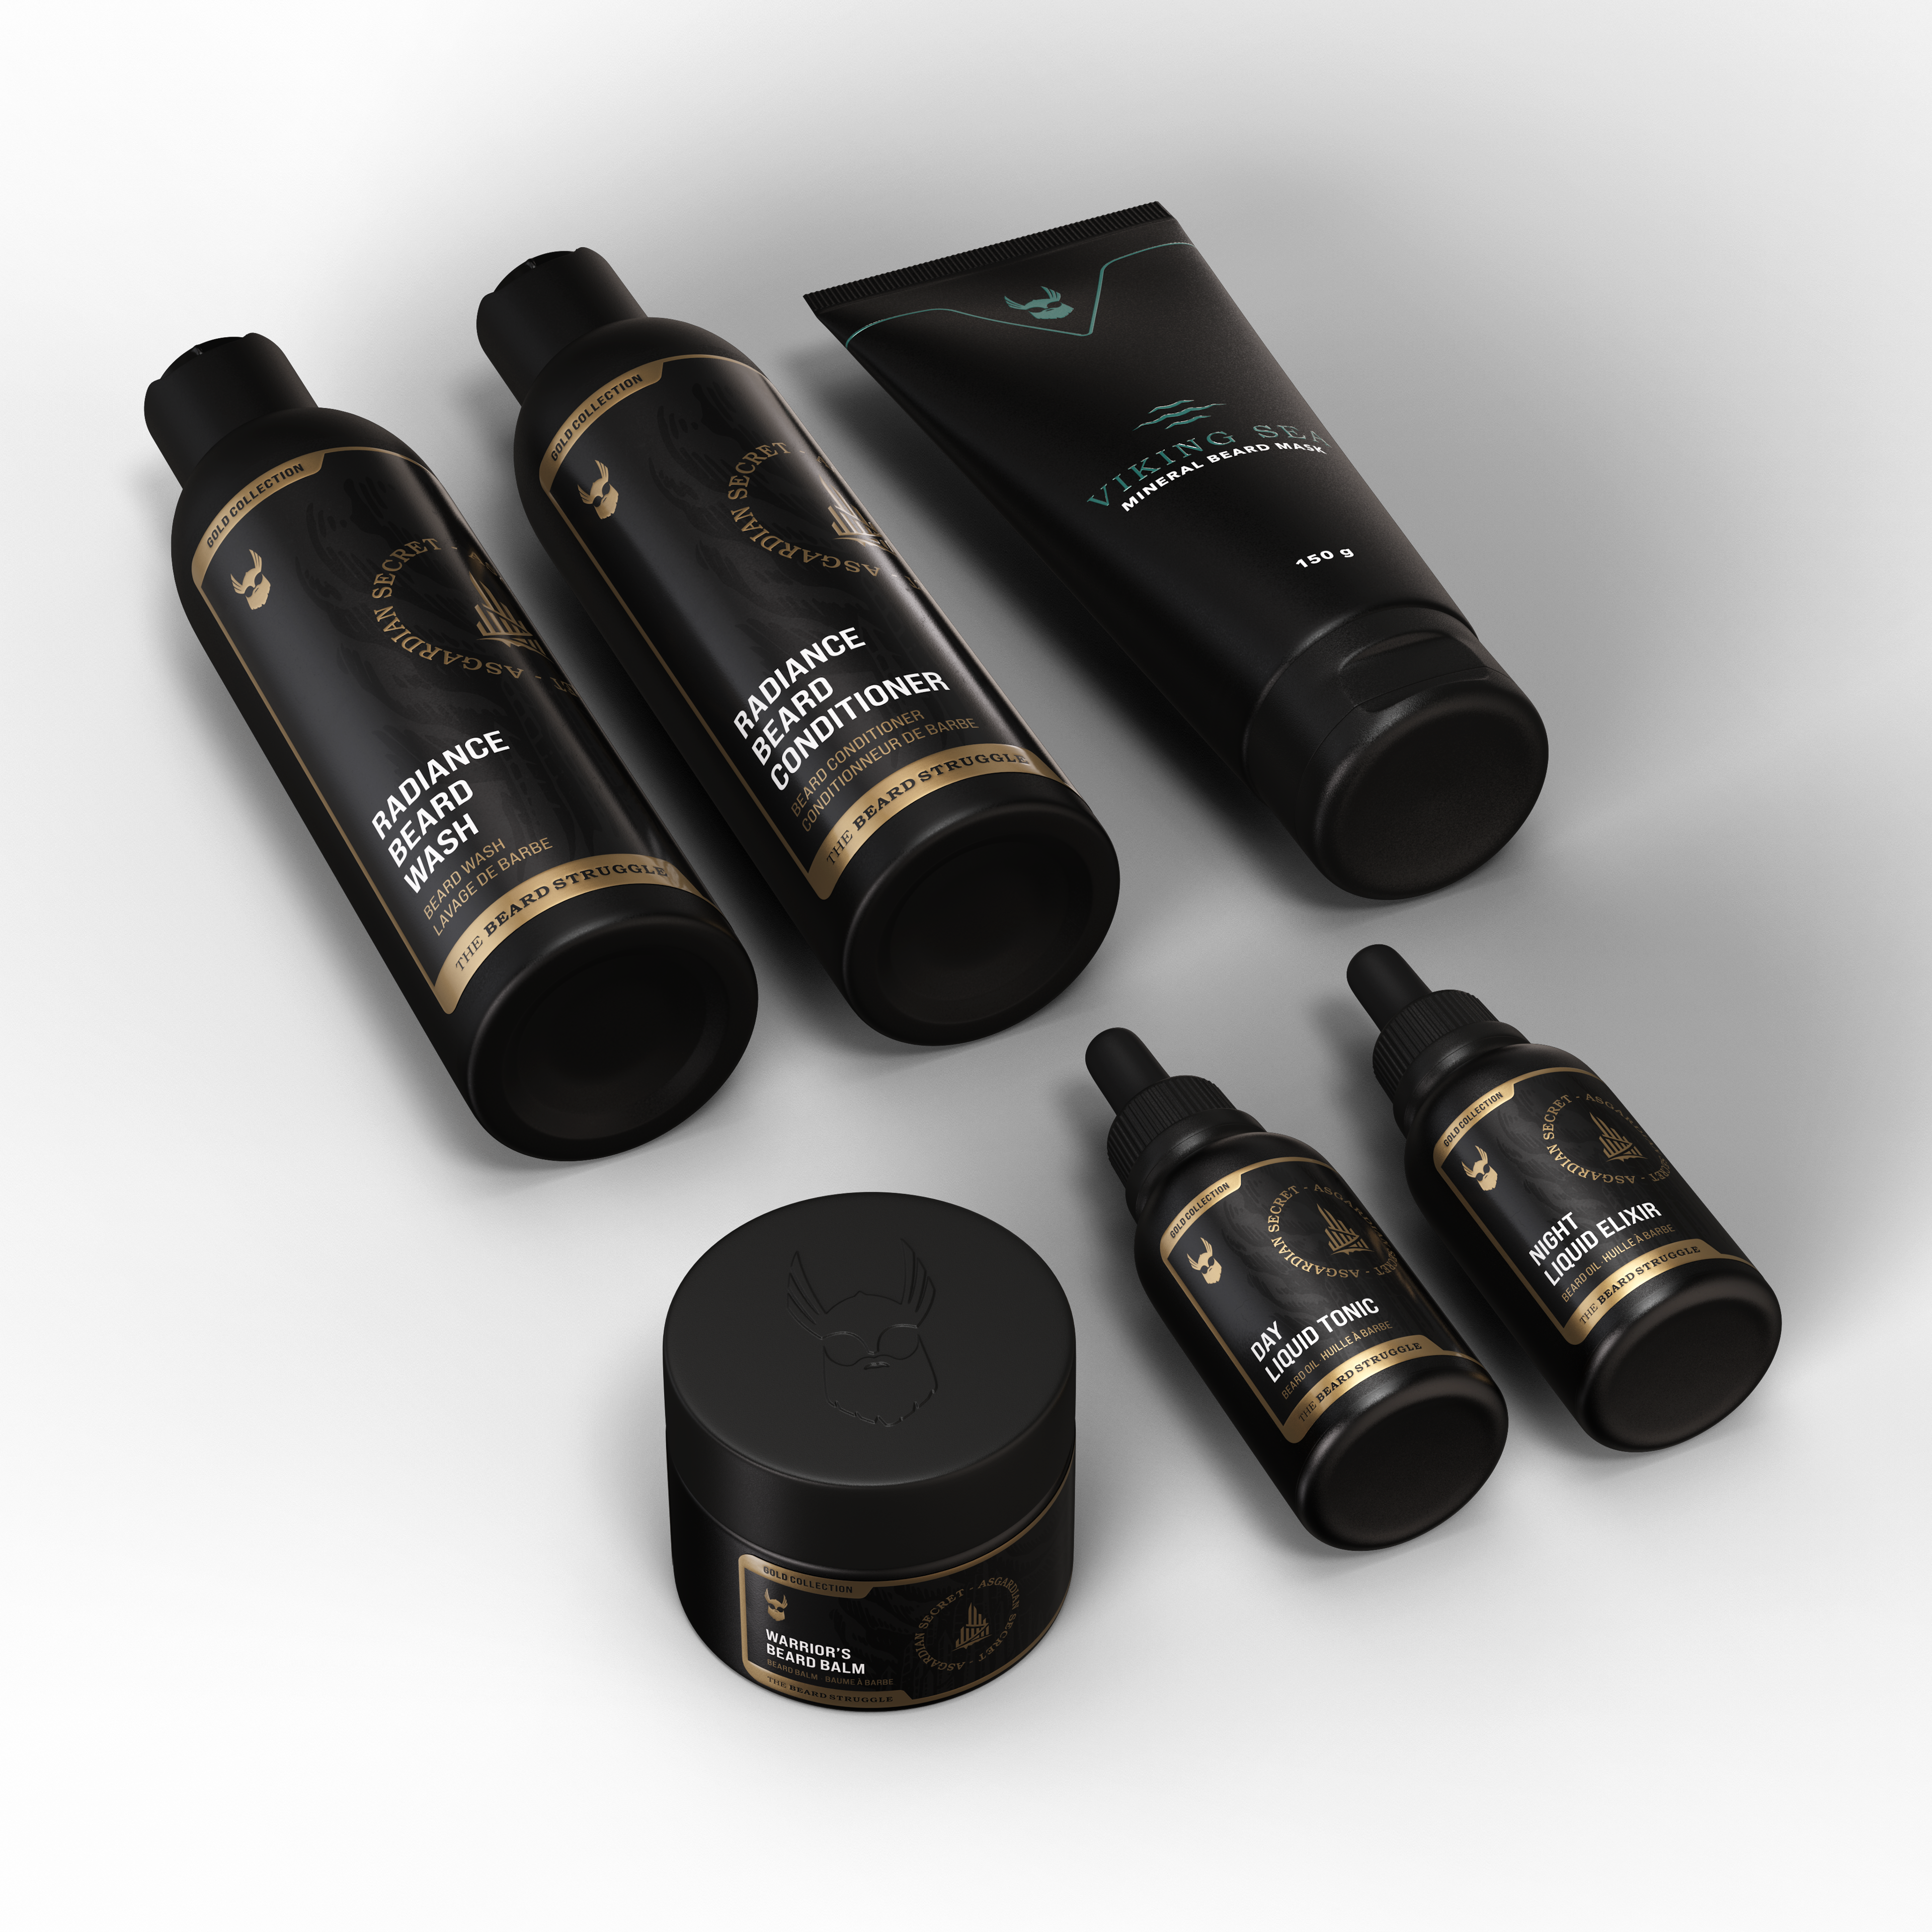 The Beard Struggle The Complete Kit Gold Collection